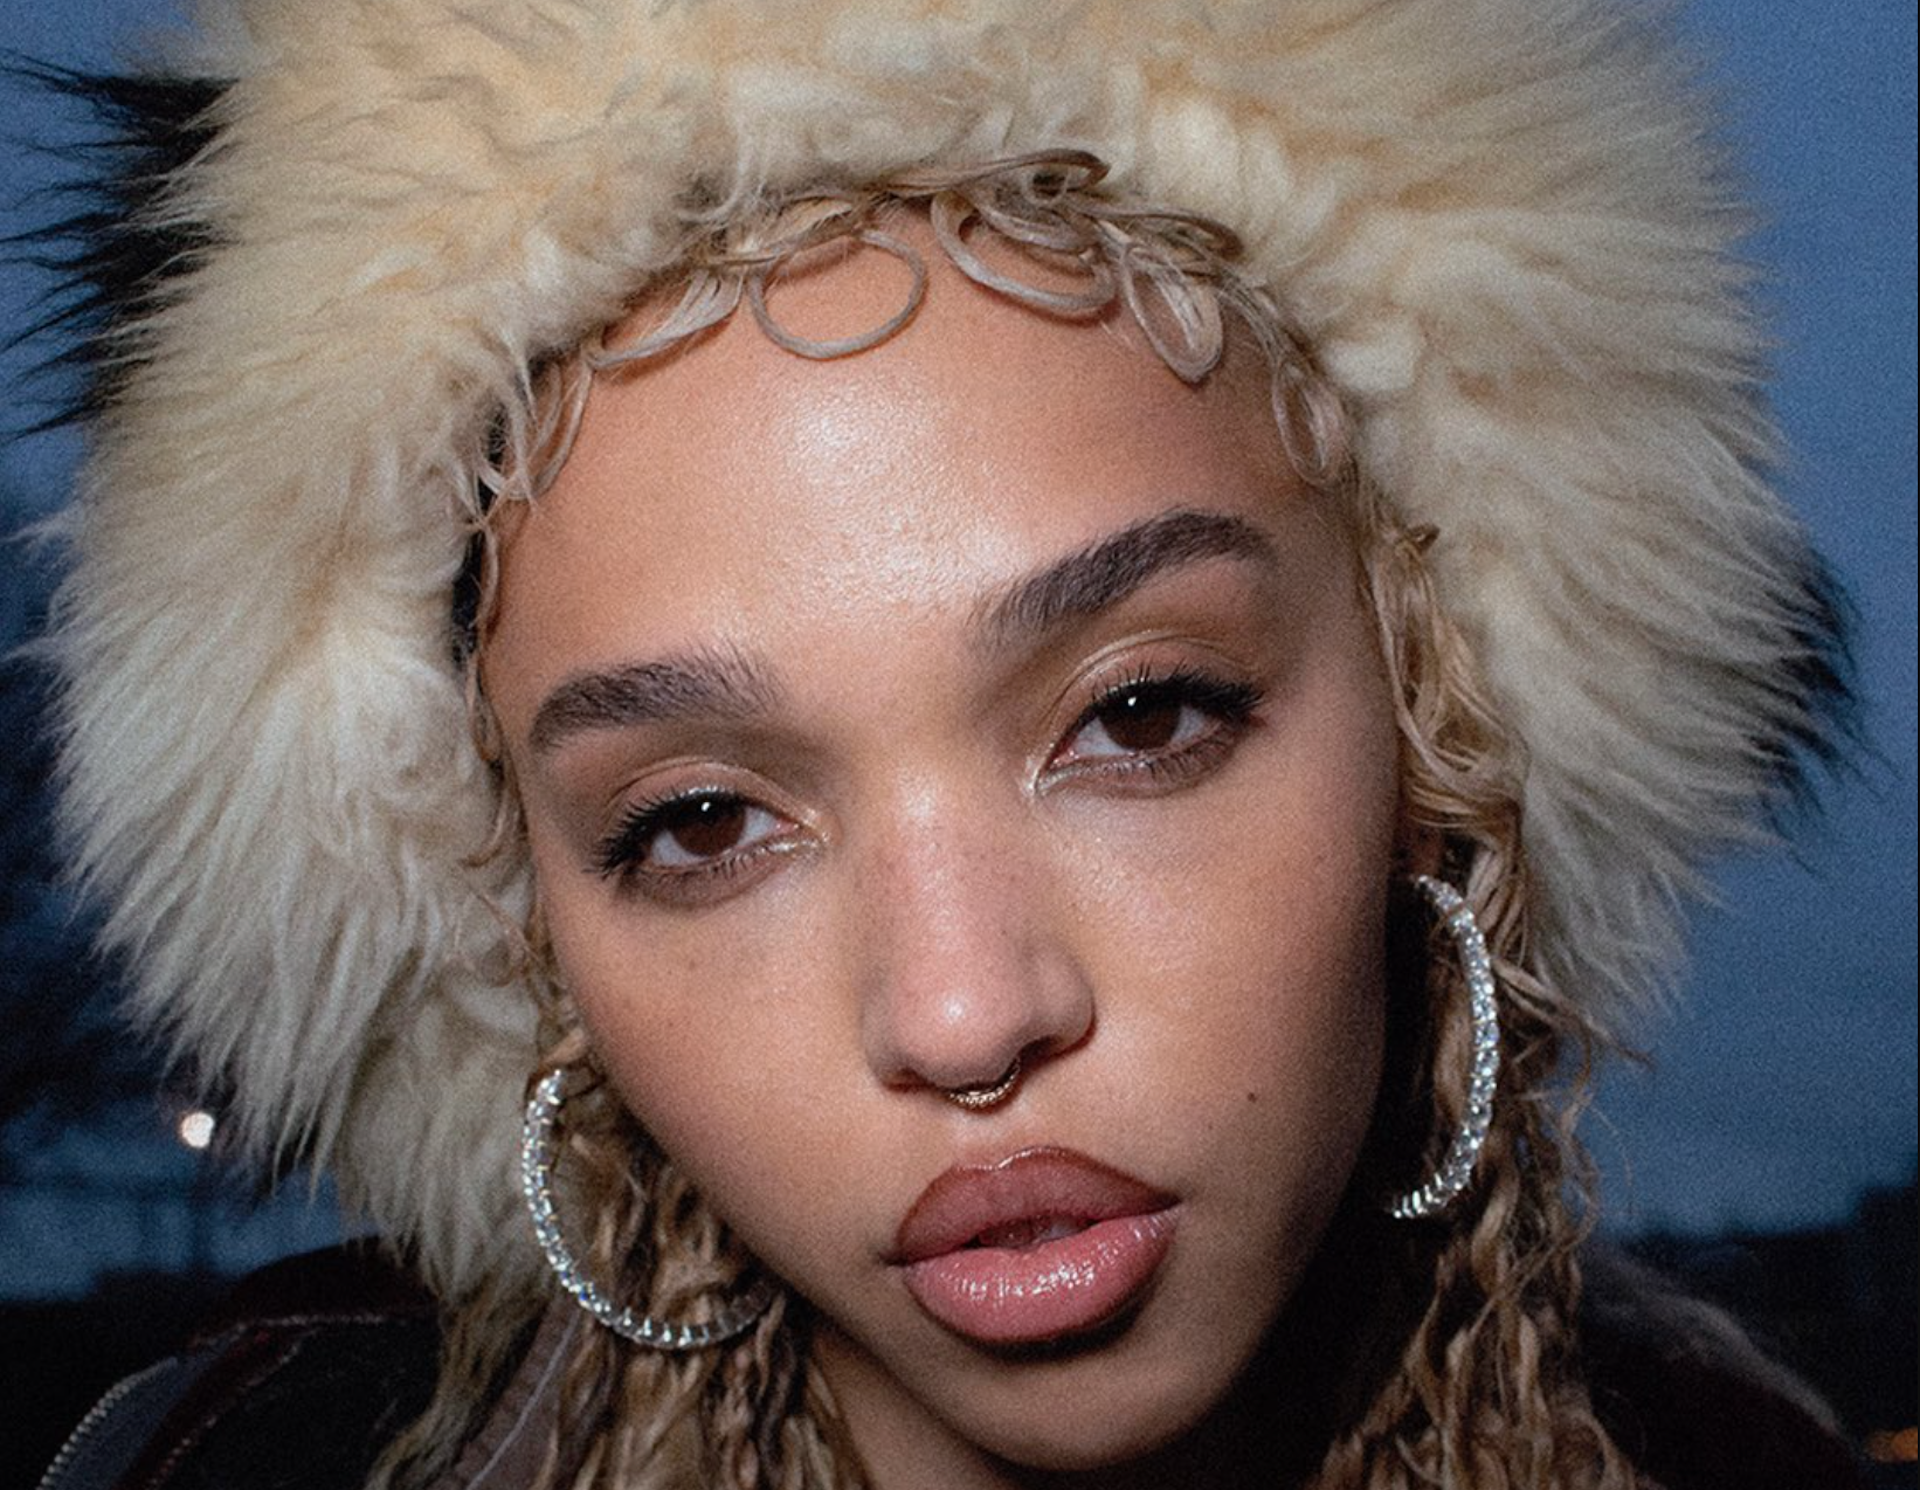 The famous Italian fashion house surprised fans with the atypical addition of FKA Twigs and Ethel Cain to their Spring/Summer 2023 Paris Fashion Week show.